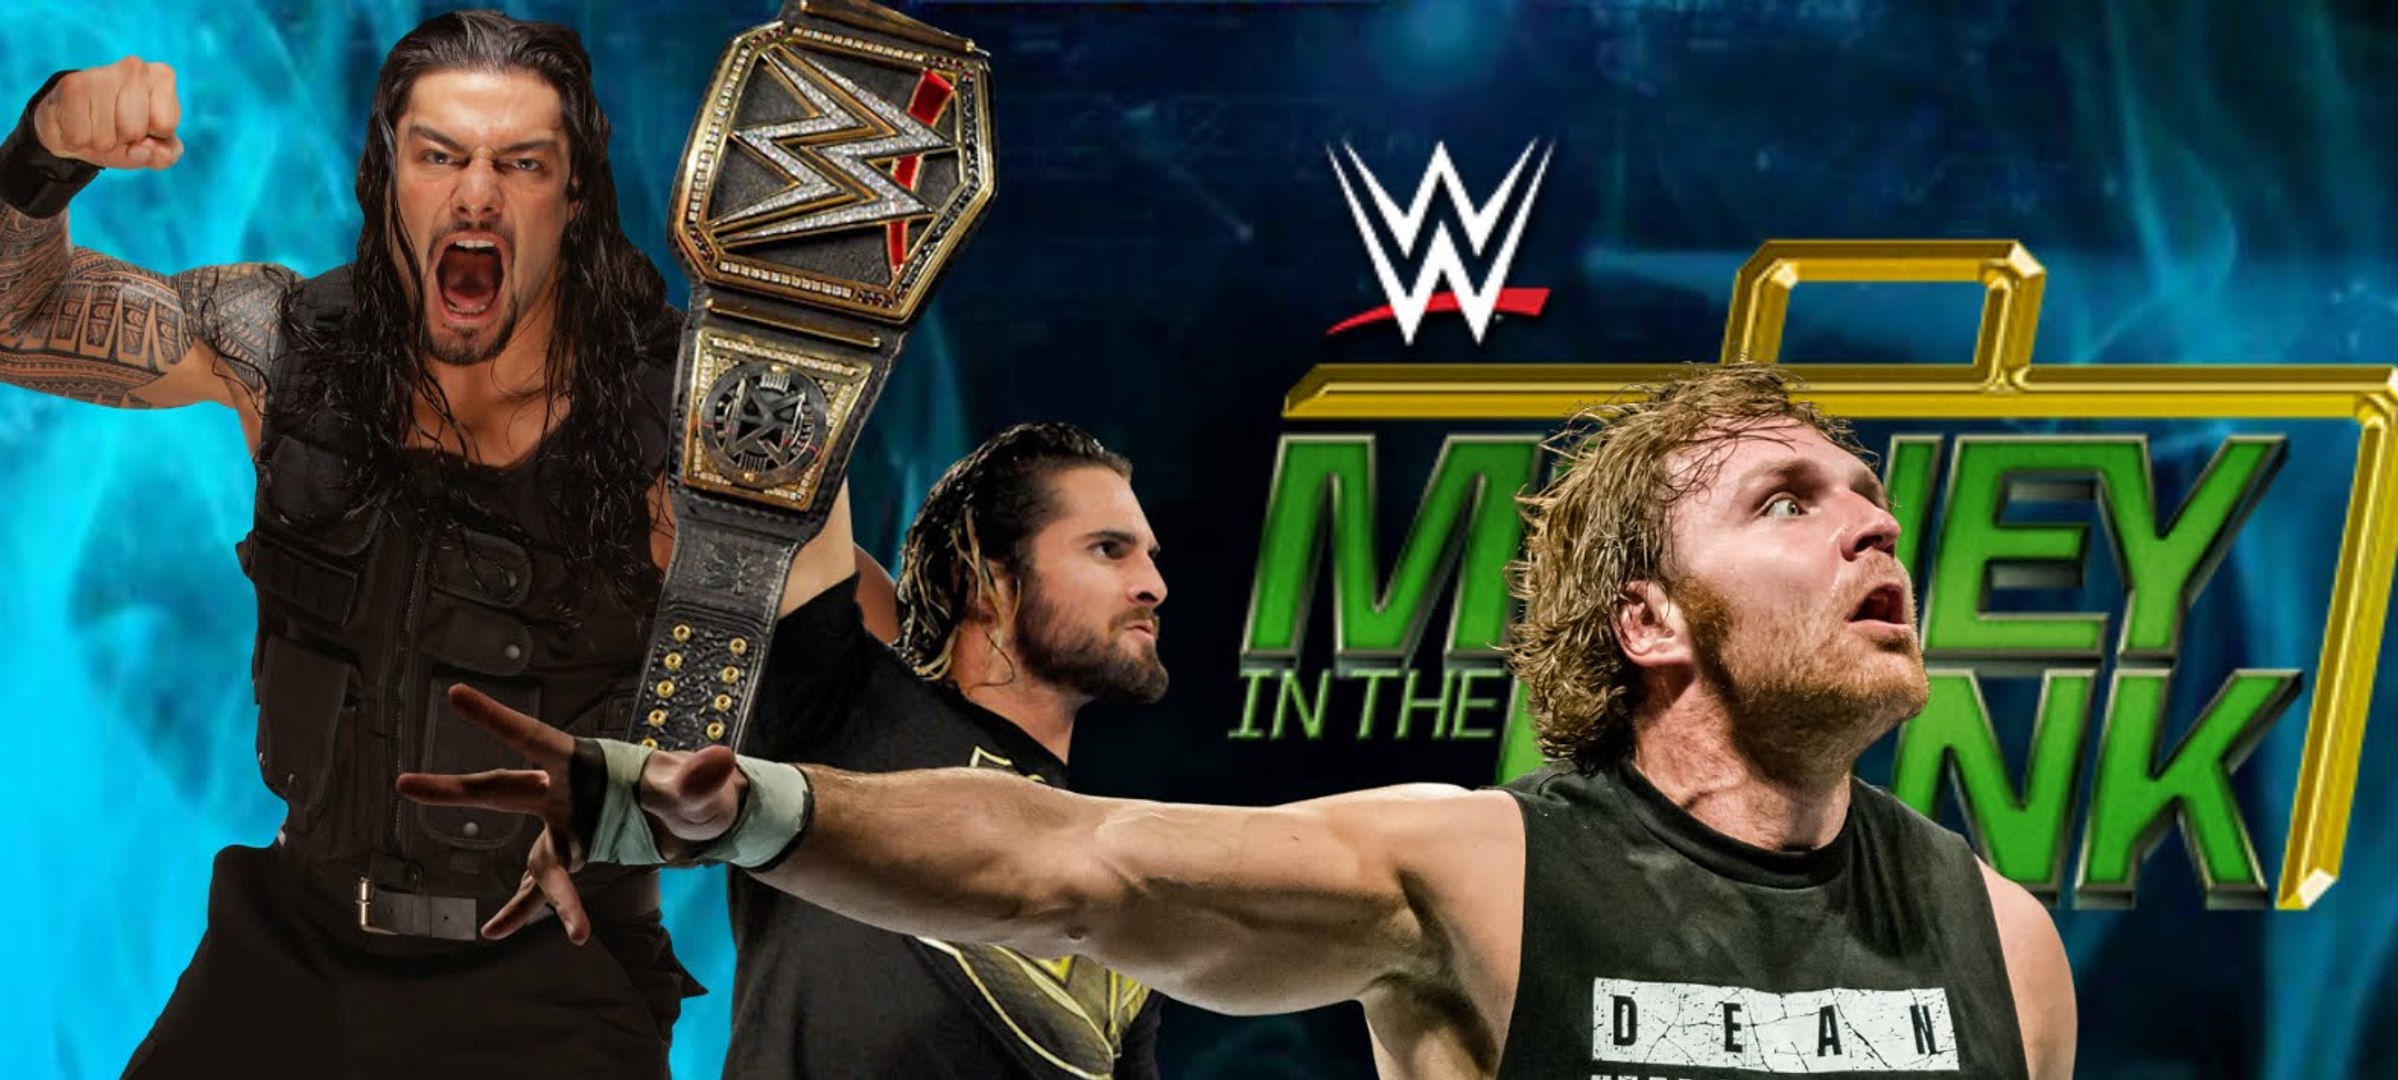 WWE Money in the bank 2016 full show Roman reigns vs Seth Rollins full match  19/6/2016 - video Dailymotion